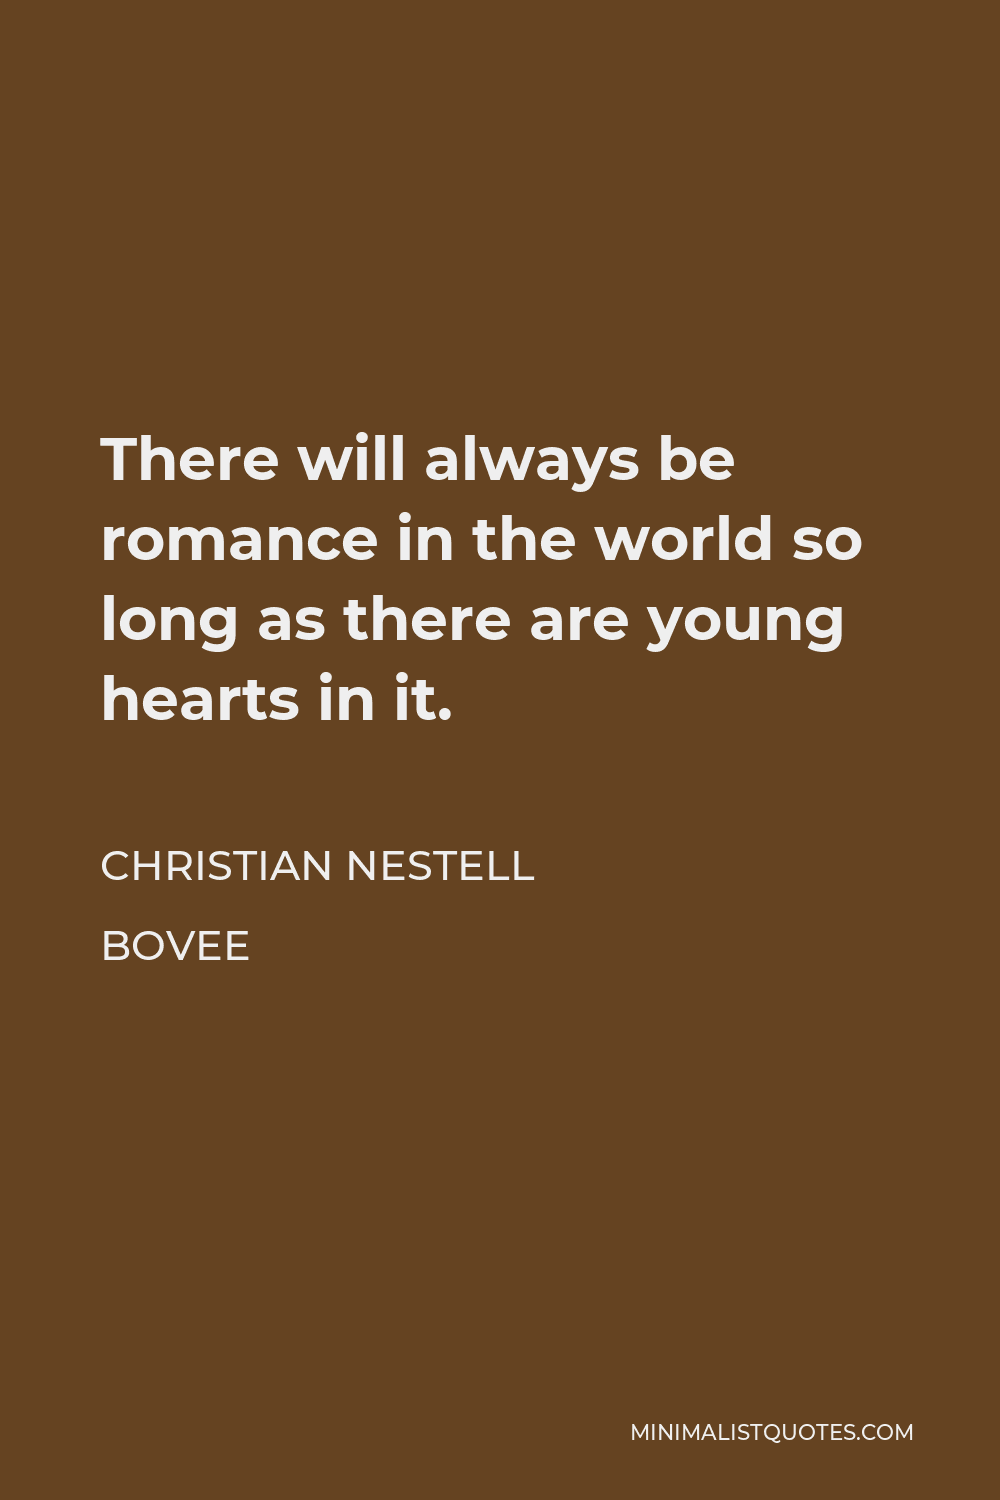 Christian Nestell Bovee Quote - There will always be romance in the world so long as there are young hearts in it.